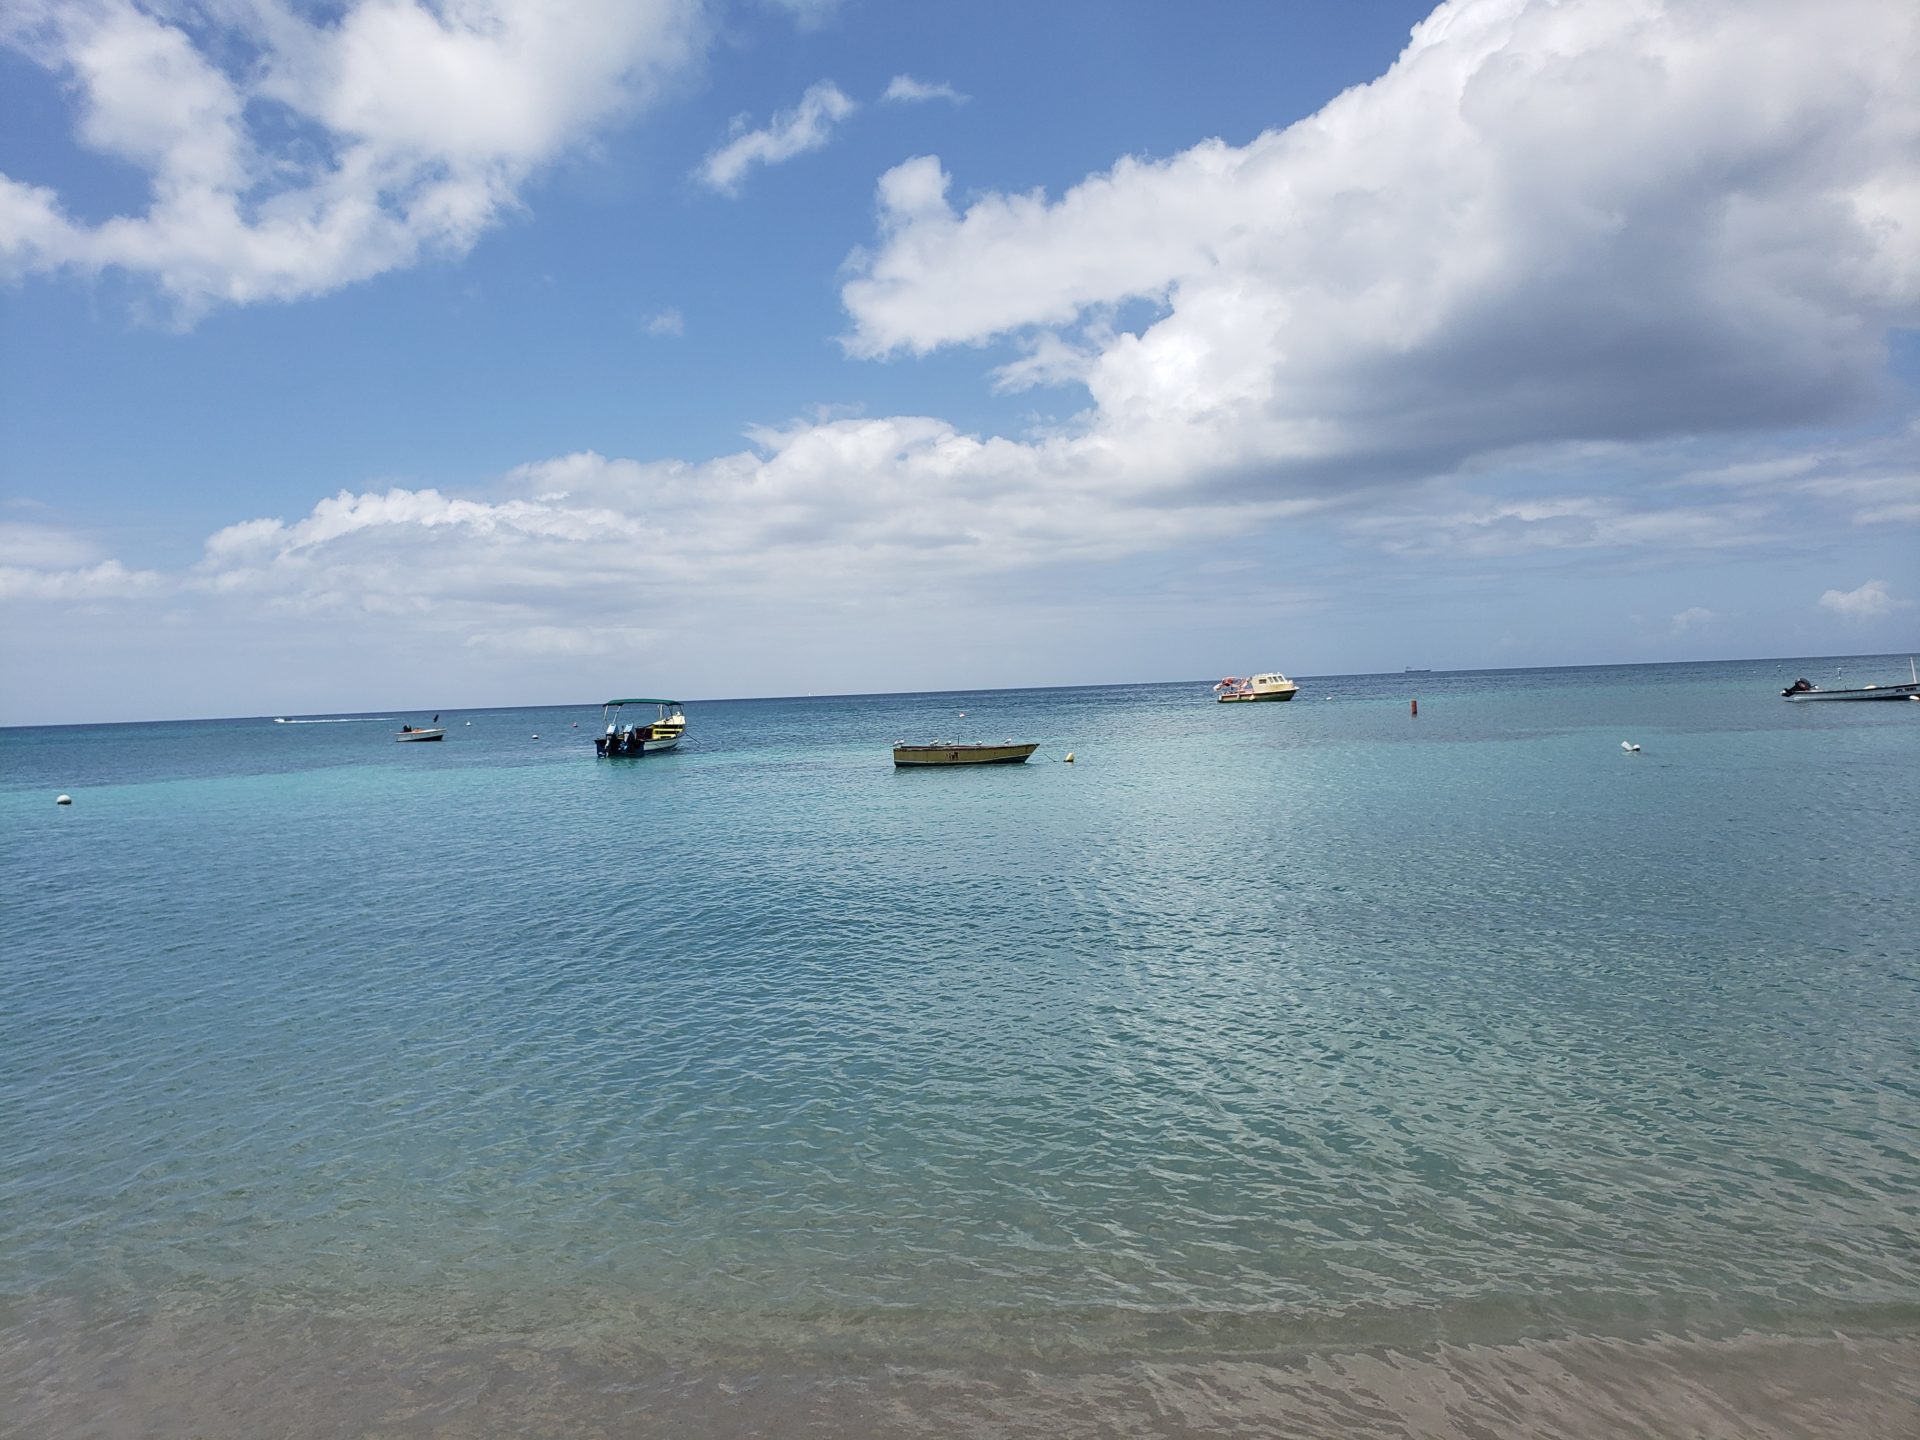 boats in the water with a sandy beach and clouds in the sky